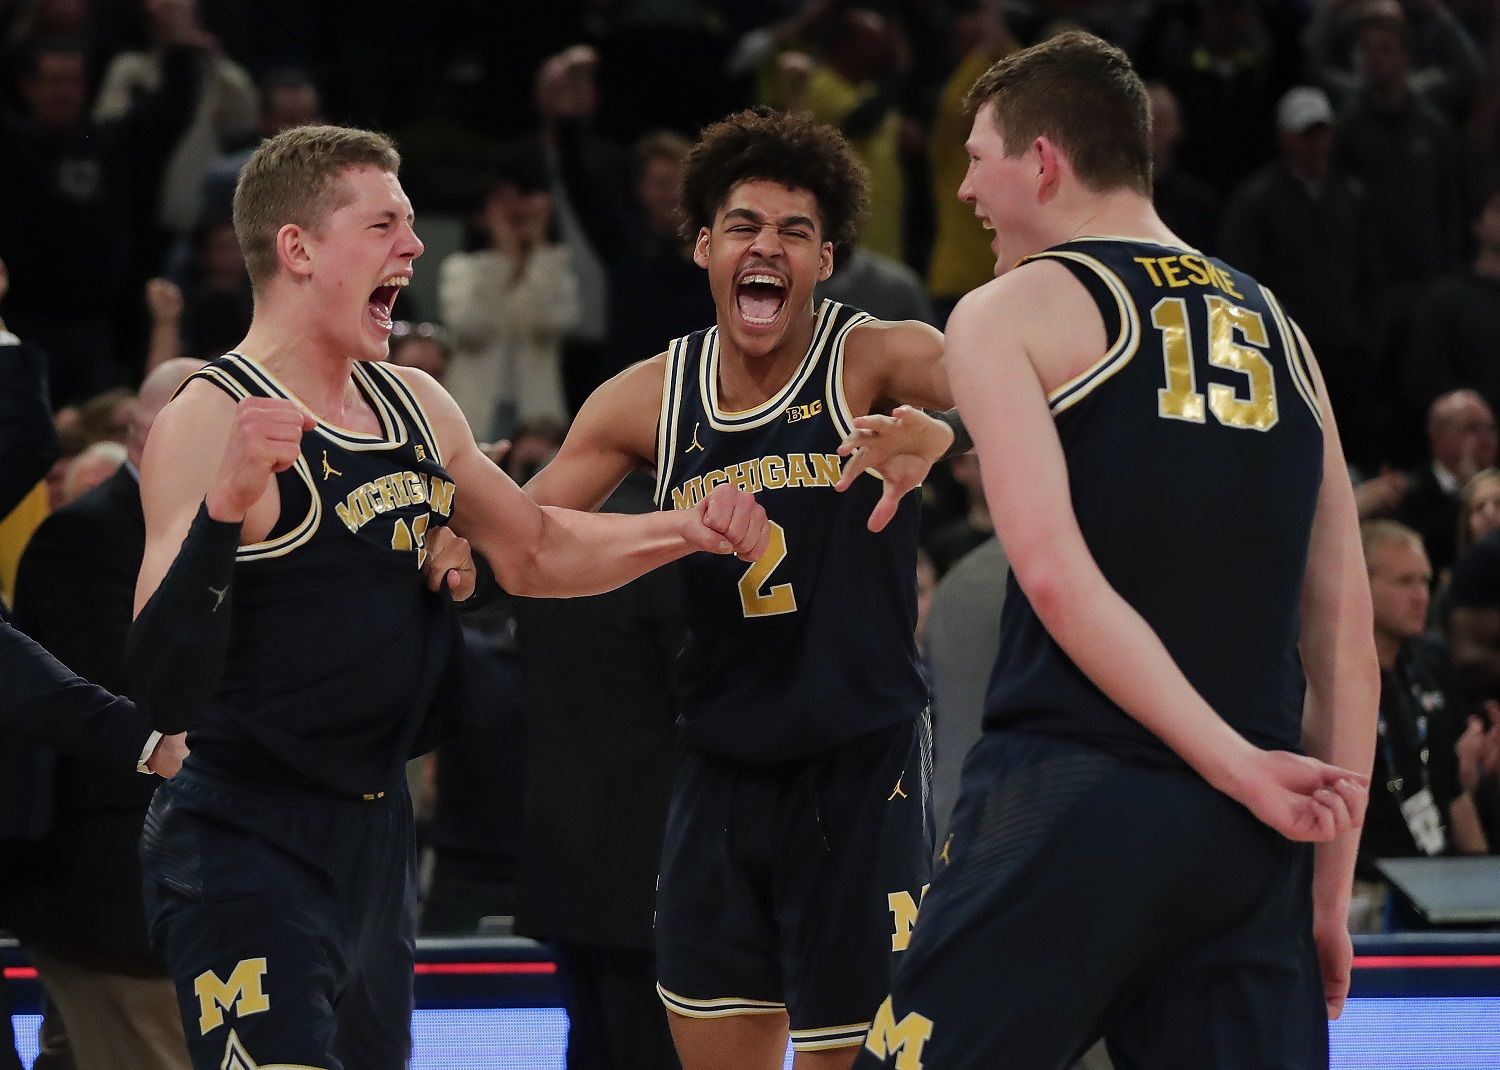 From left, Michigan forward Moritz Wagner, guard Jordan Poole (2) and center Jon Teske (15) celebrate after Michigan beat Purdue of the NCAA Big Ten Conference tournament championship college basketball game, Sunday, March 4, 2018, in New York. Michigan won 75-66. (AP Photo/Julie Jacobson)